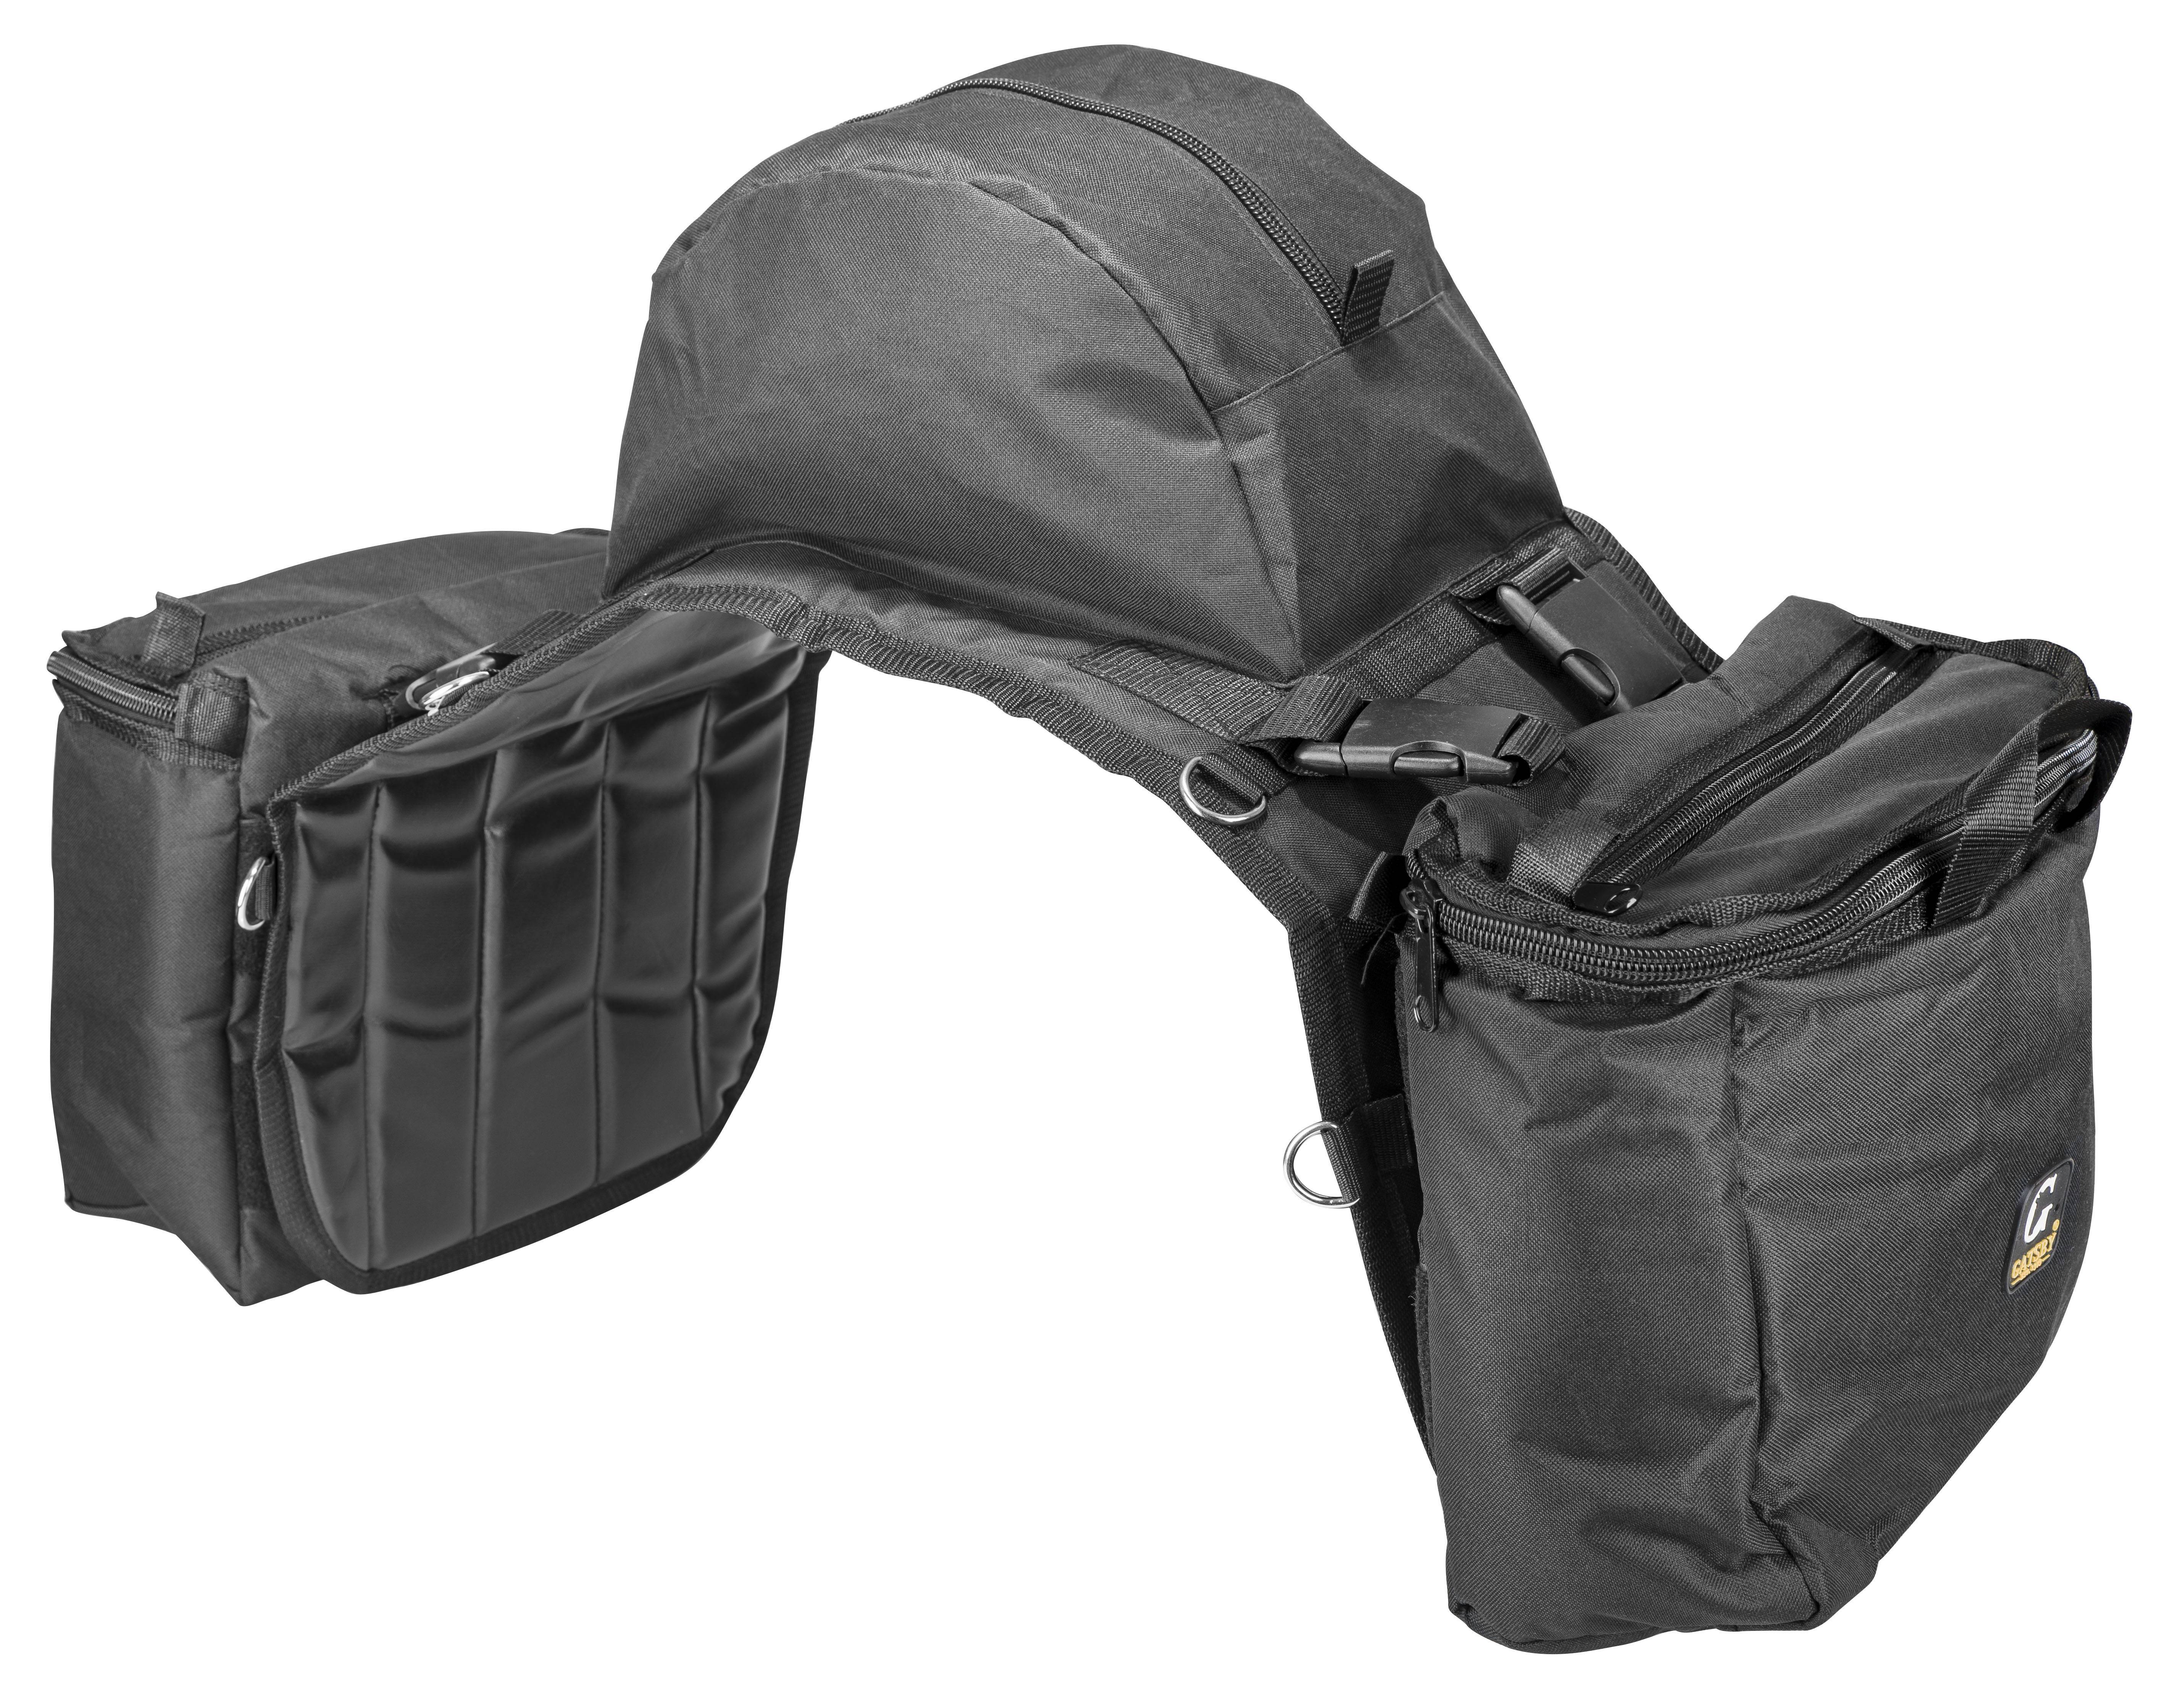 TrailMax Canvas Pack Saddle Panniers with Nylon Webbing